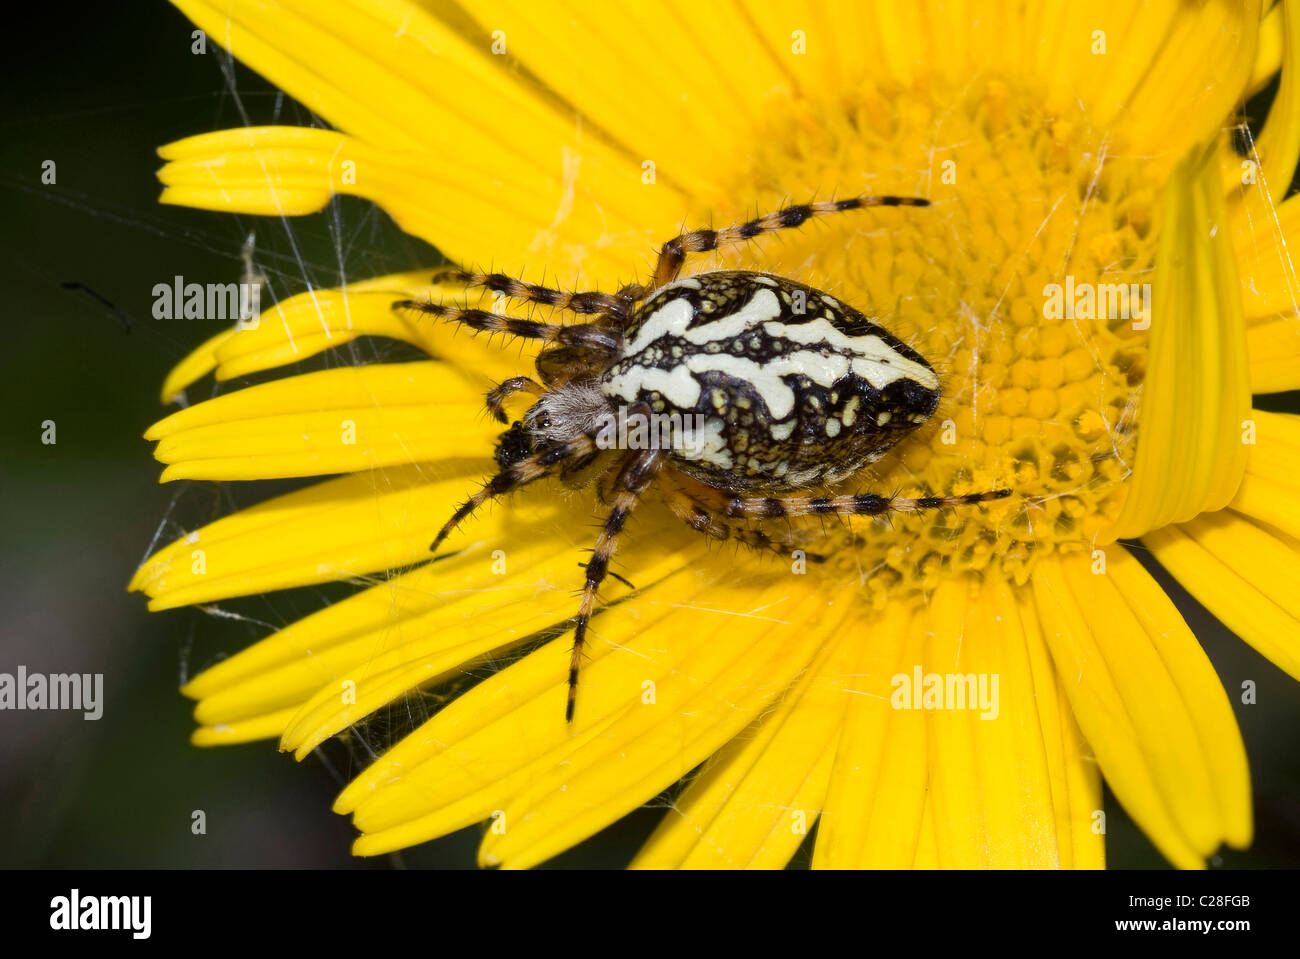 Oak Spider, Oakleaf Spider (Aculepeira carbonaria) on a yellow flower. Stock Photo